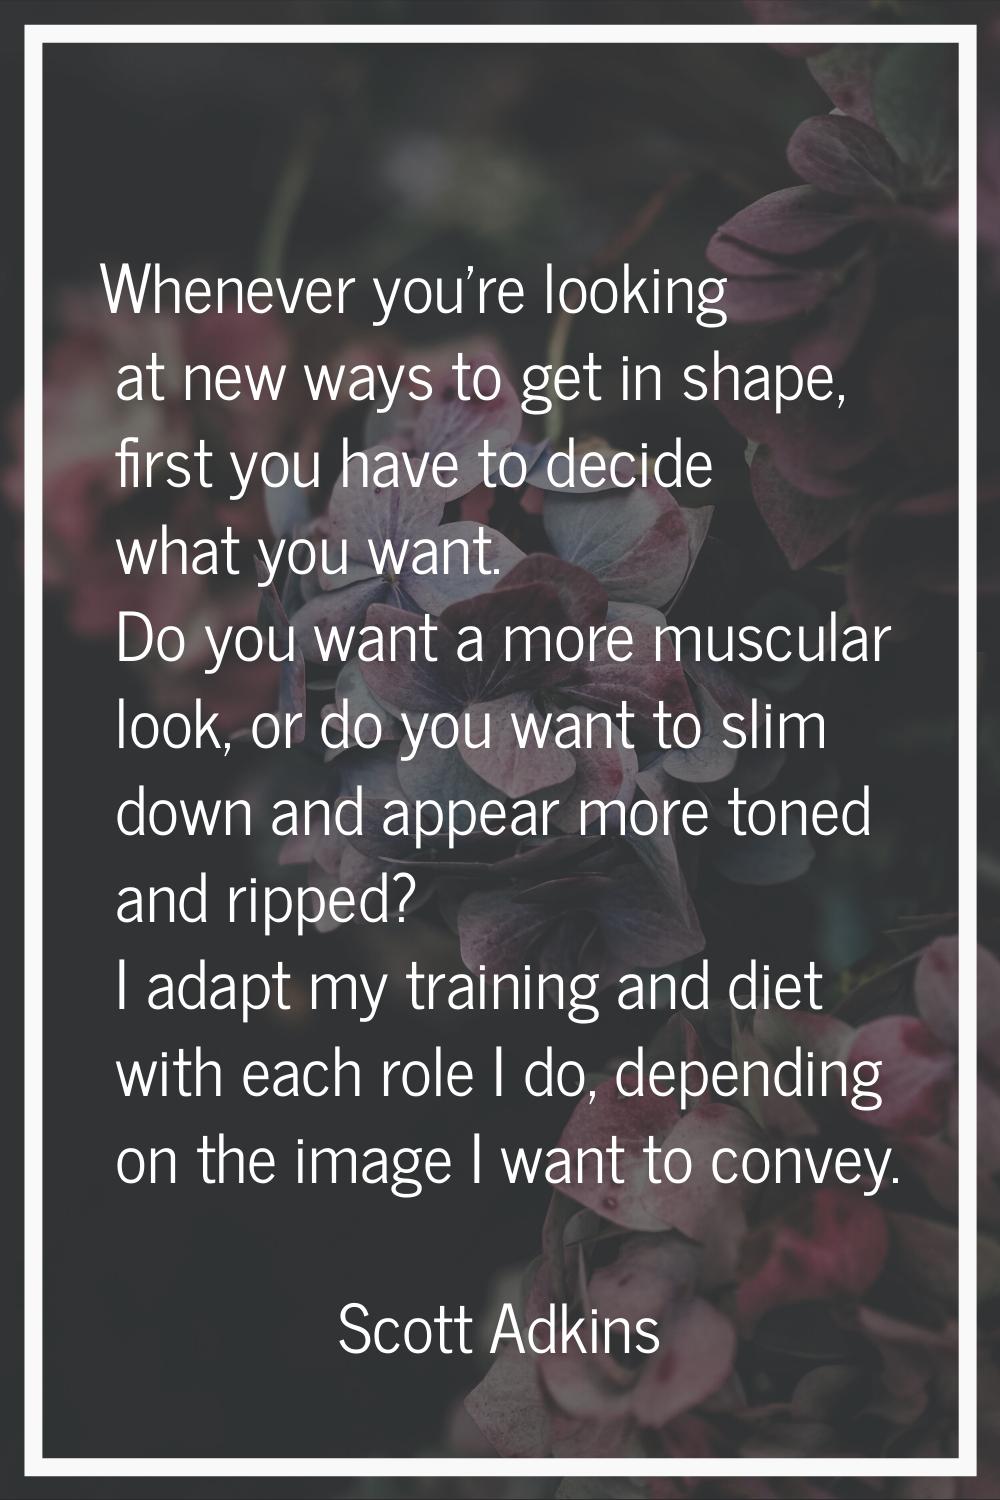 Whenever you're looking at new ways to get in shape, first you have to decide what you want. Do you